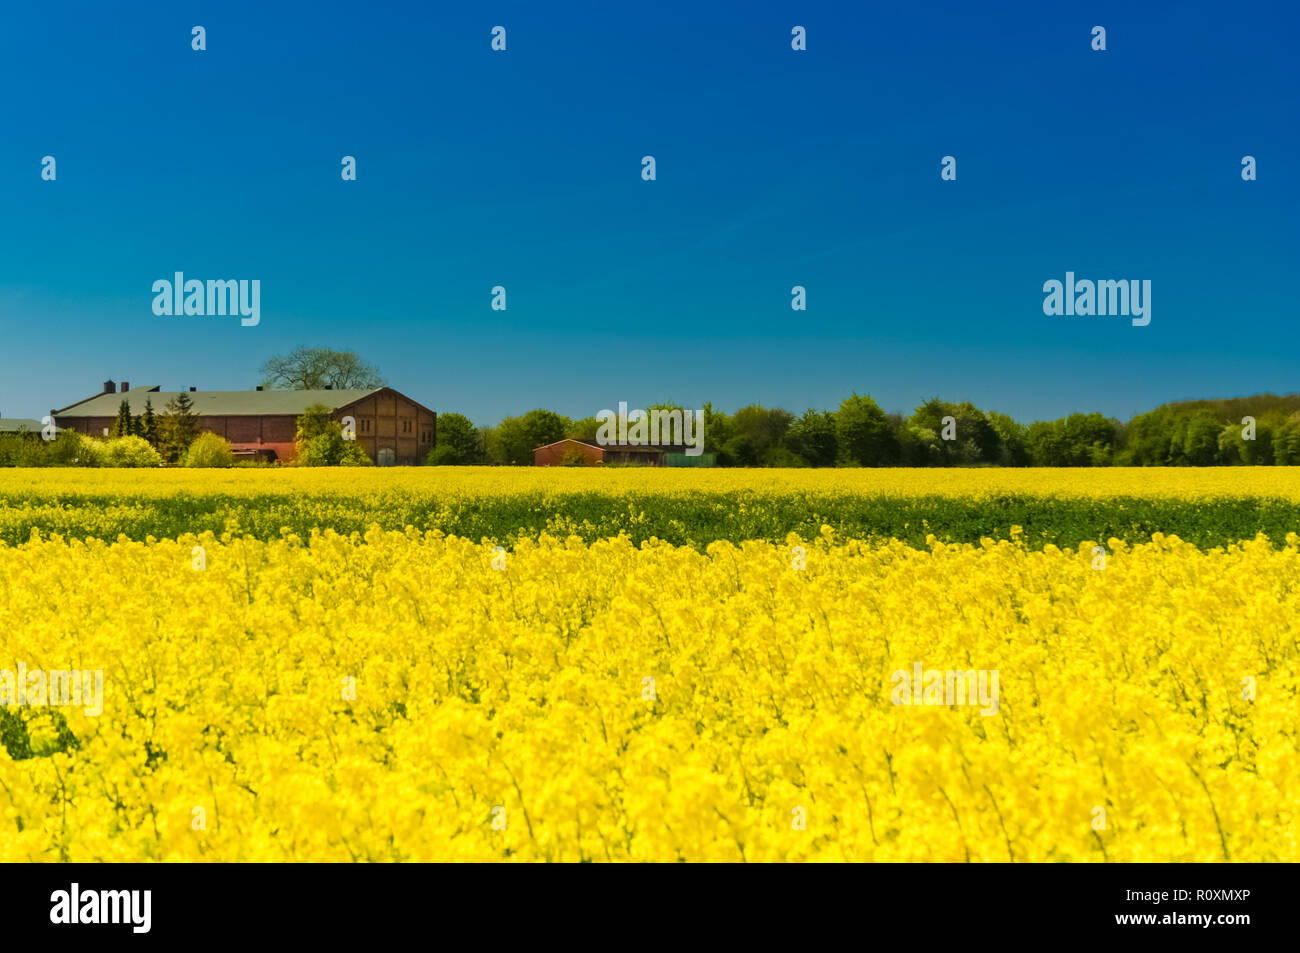 A picturesque landscape view of yellow canola flowers (Brassica napus) with a red brick farmhouse in the background and a beautiful blue sky in the... Stock Photo